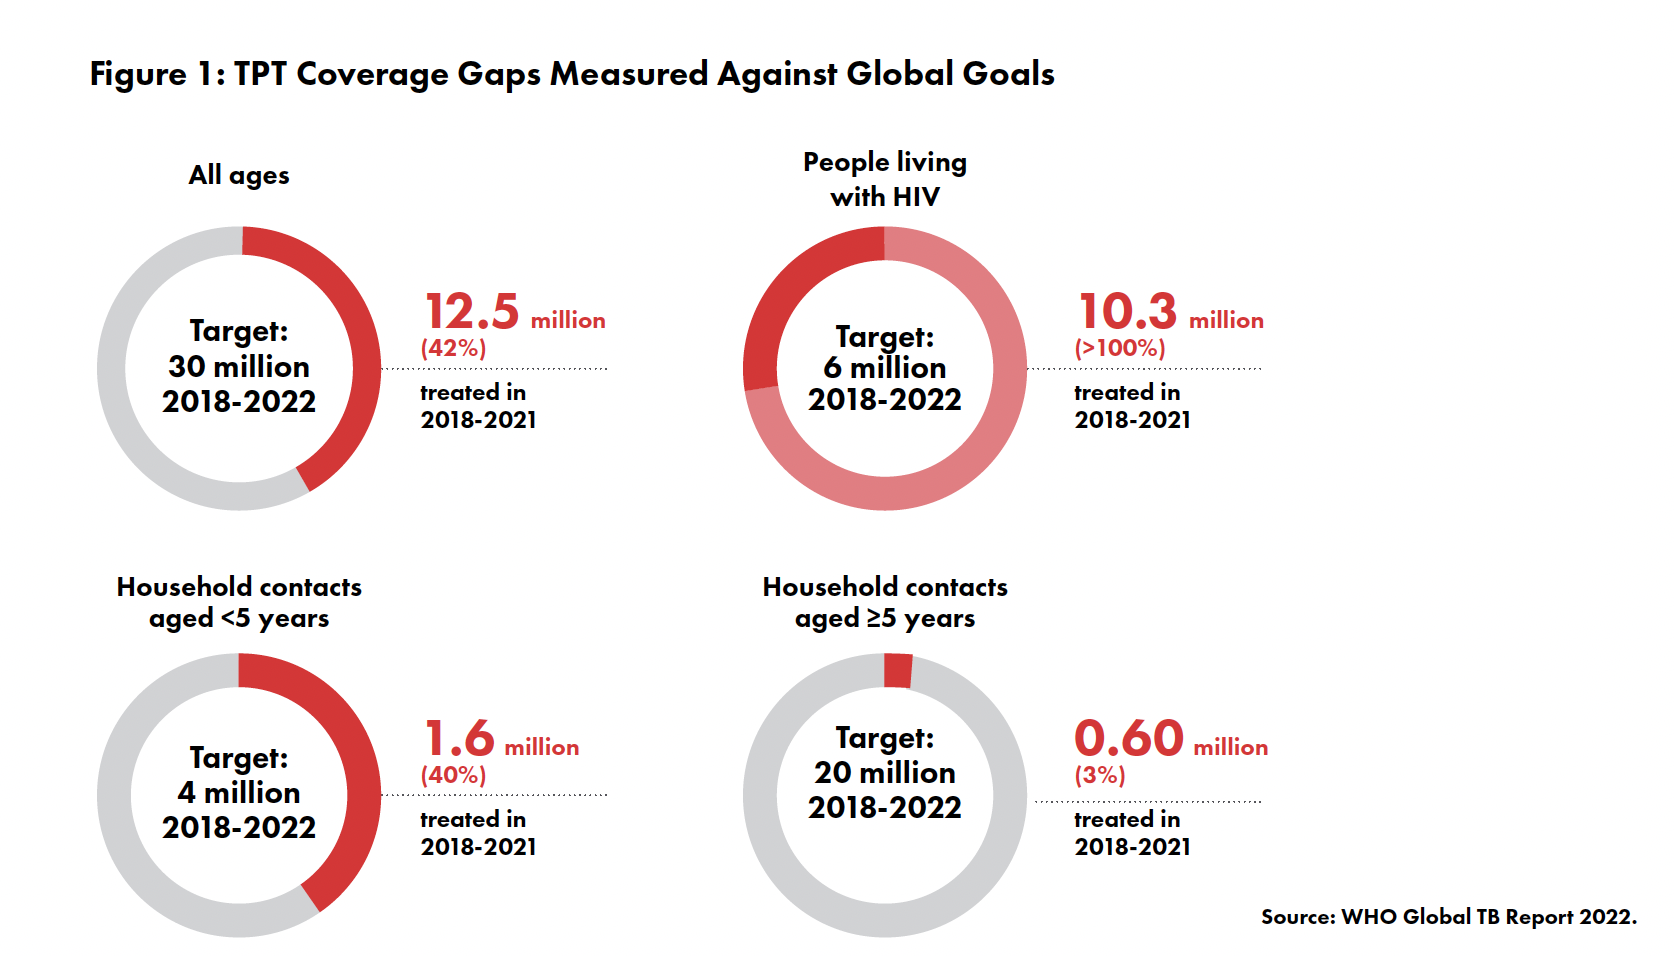 Graphic showing TPT coverage gaps measured against global goals